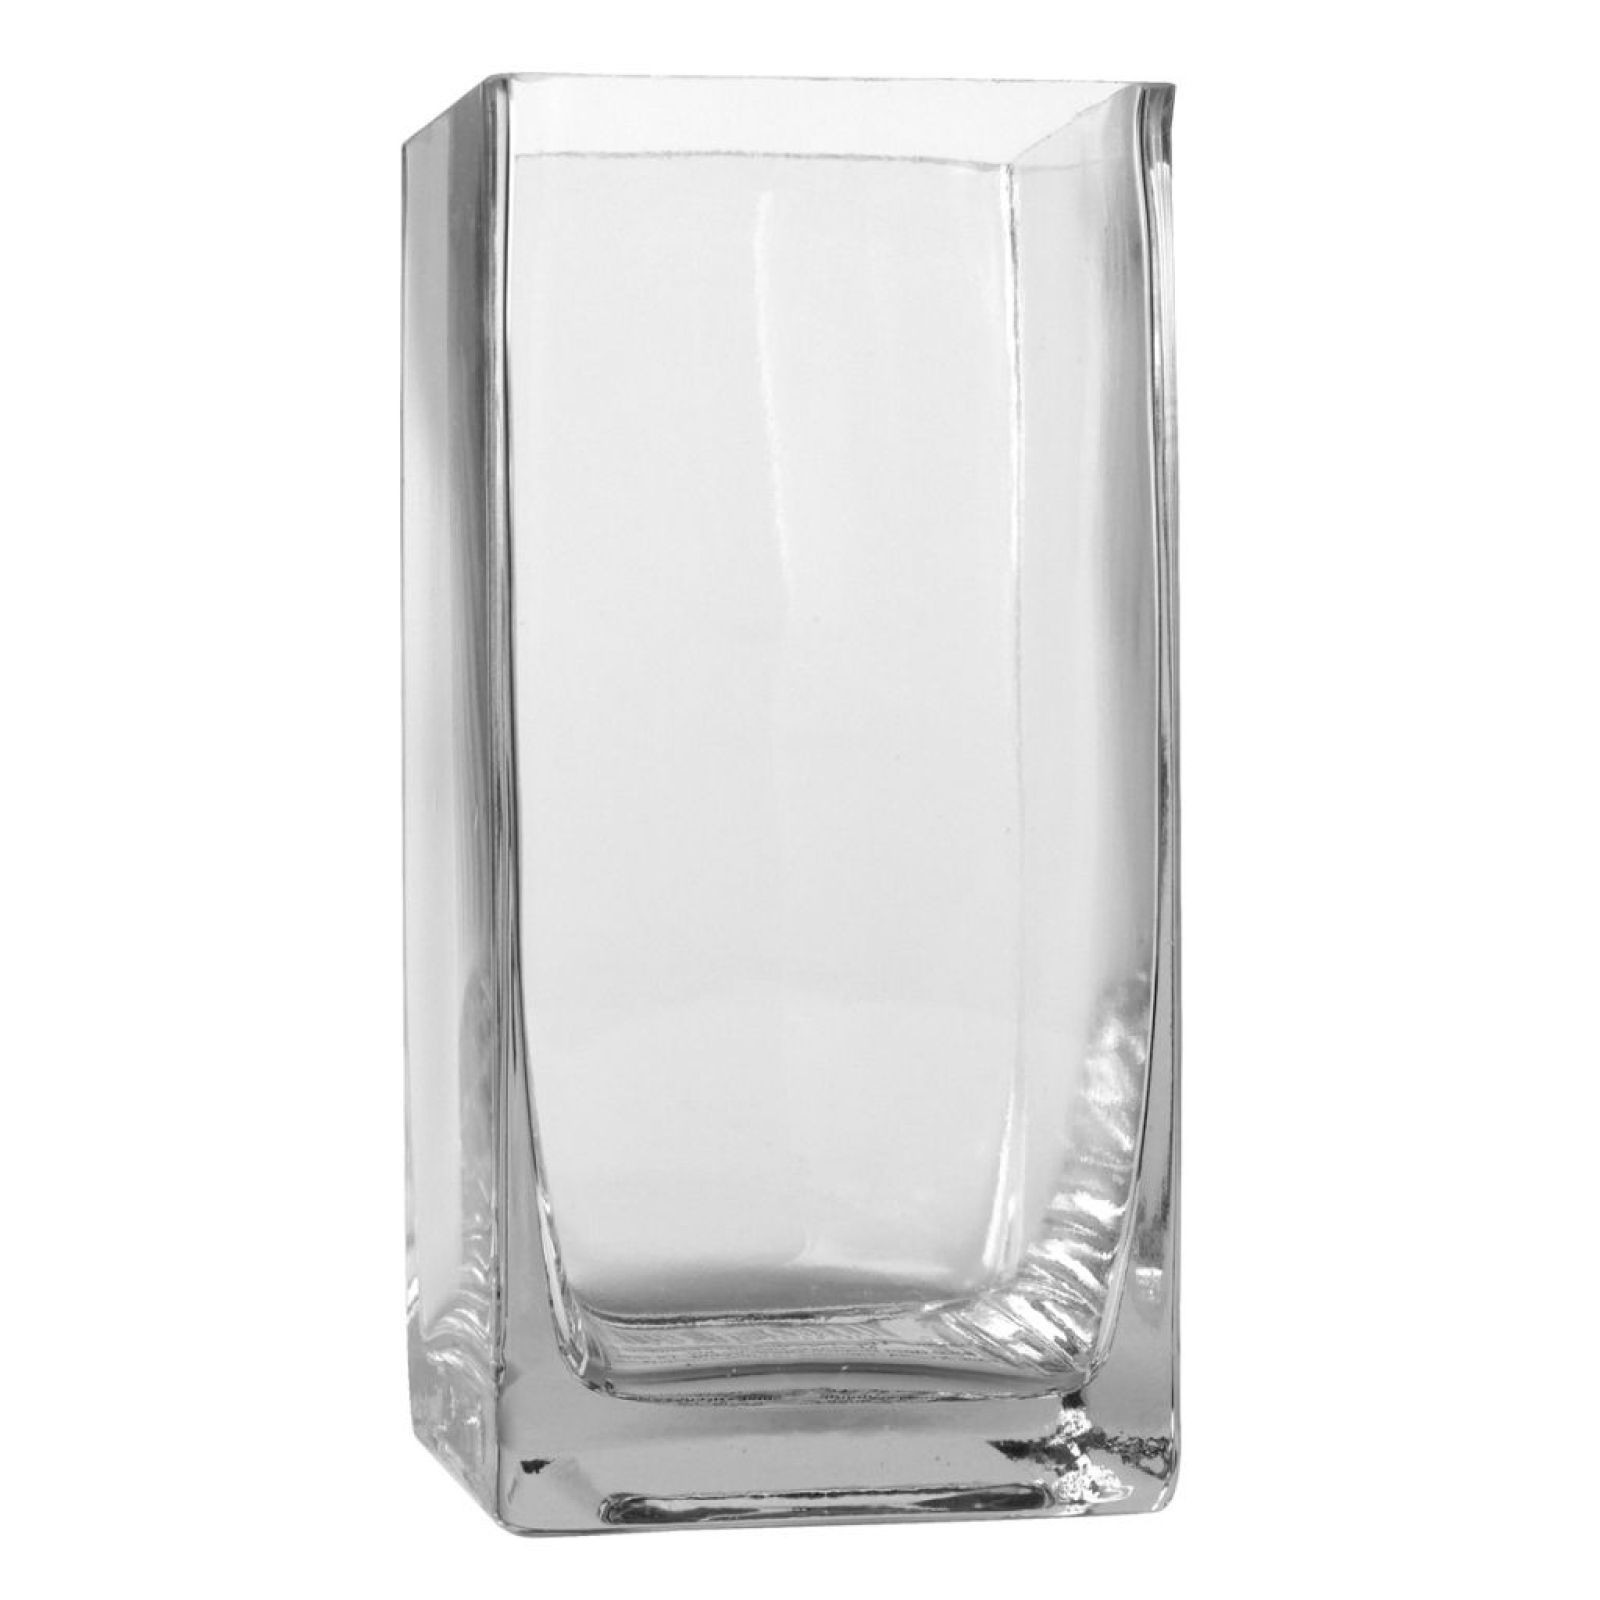 14 Fabulous 6 Cube Vase 2024 free download 6 cube vase of ashland tall cube glass vase cube and glass pertaining to ashlanda tall cube glass vase 6